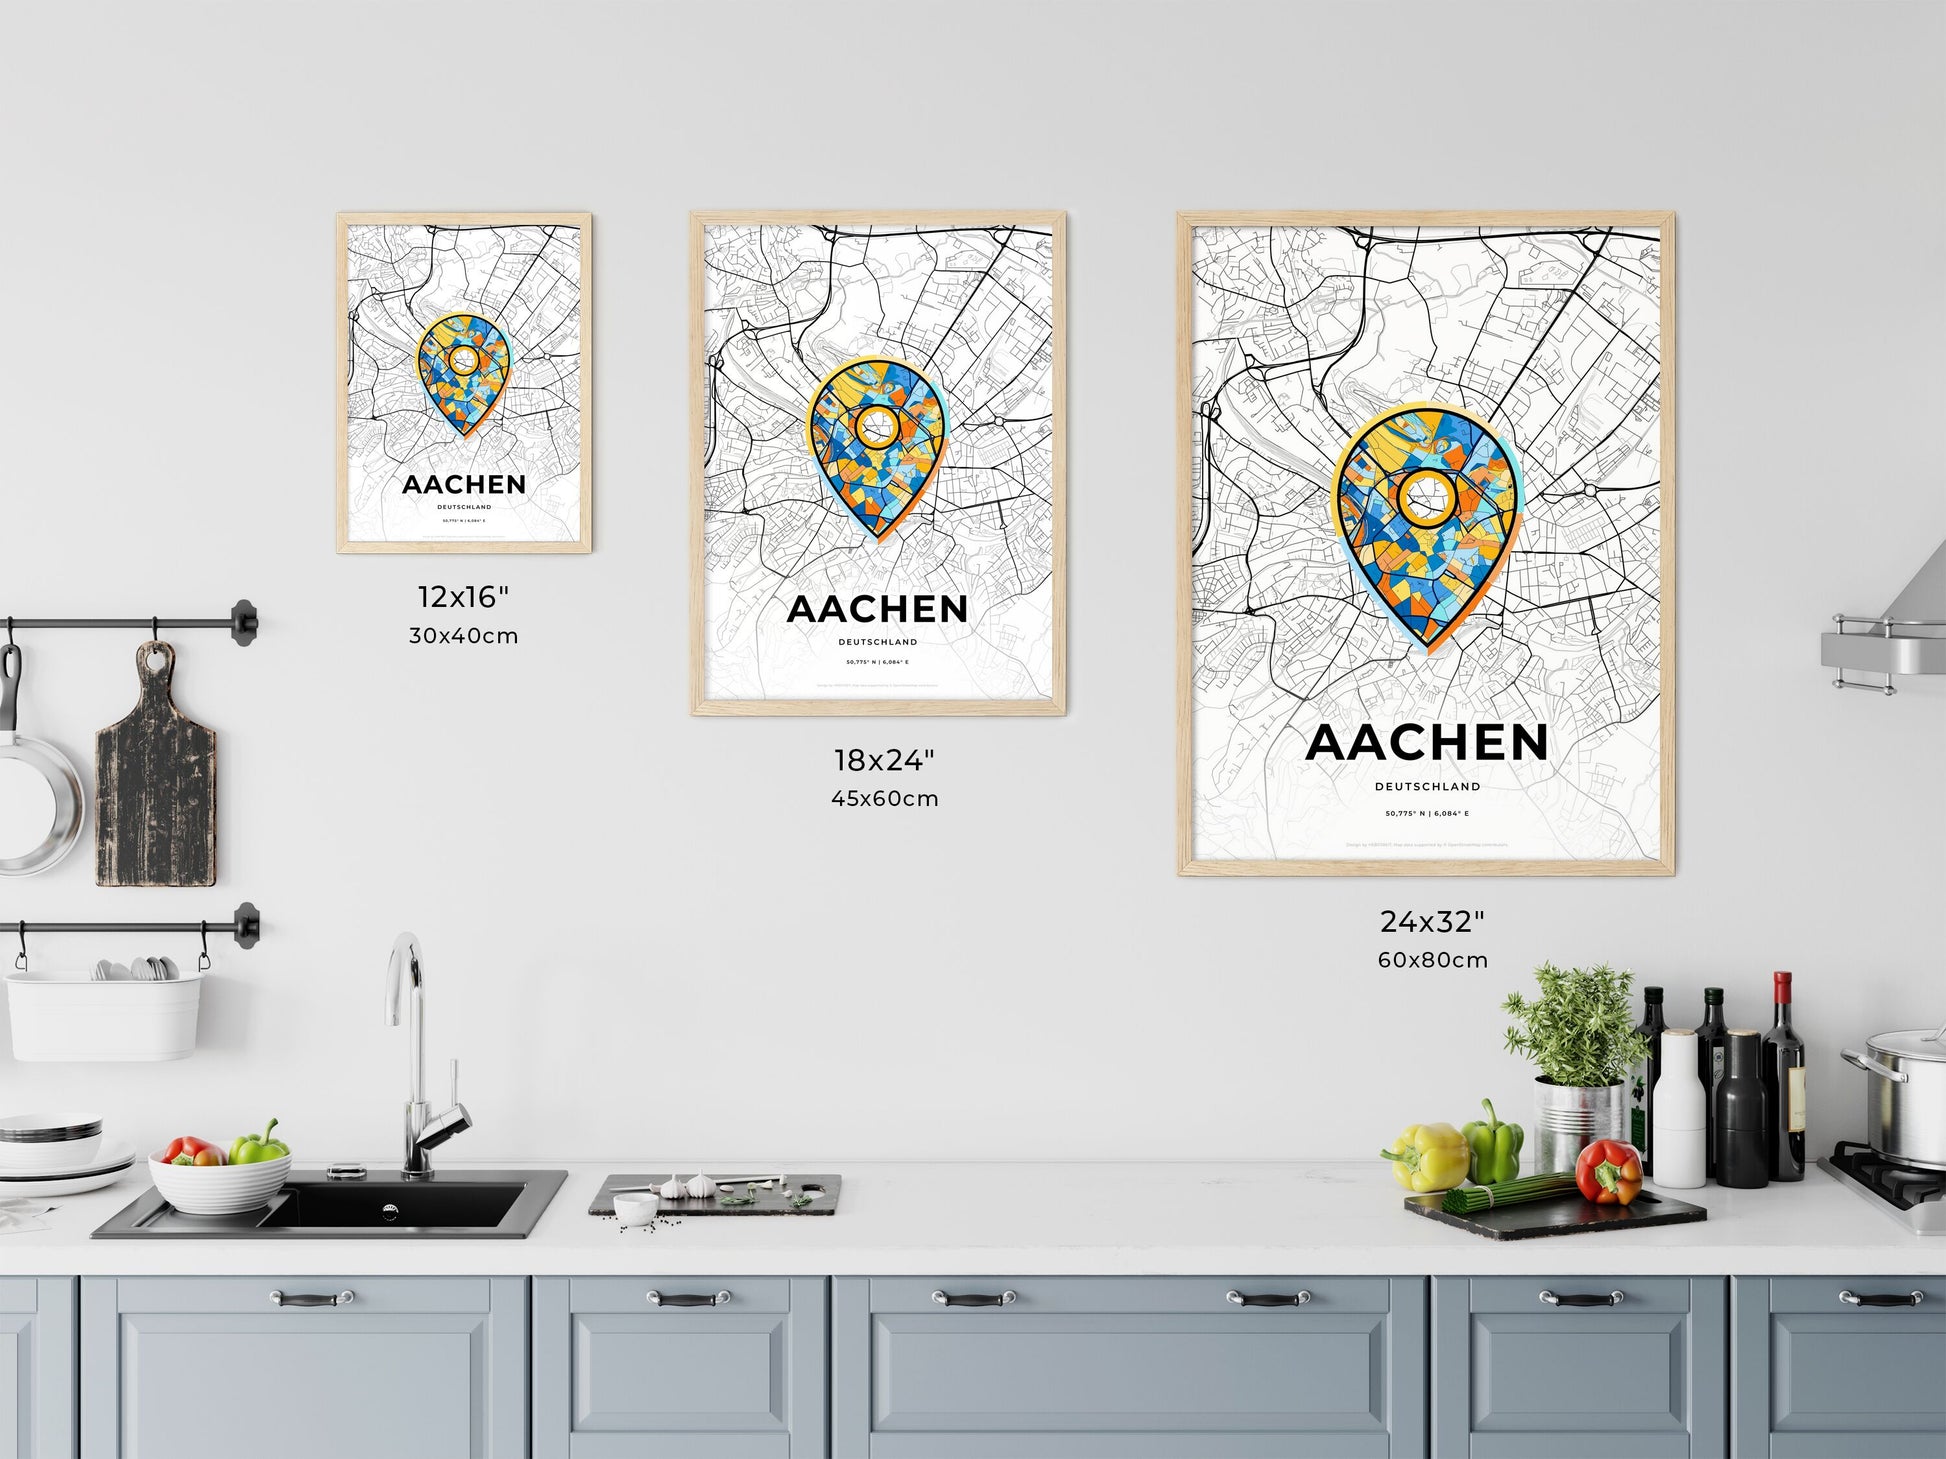 AACHEN GERMANY minimal art map with a colorful icon. Where it all began, Couple map gift.